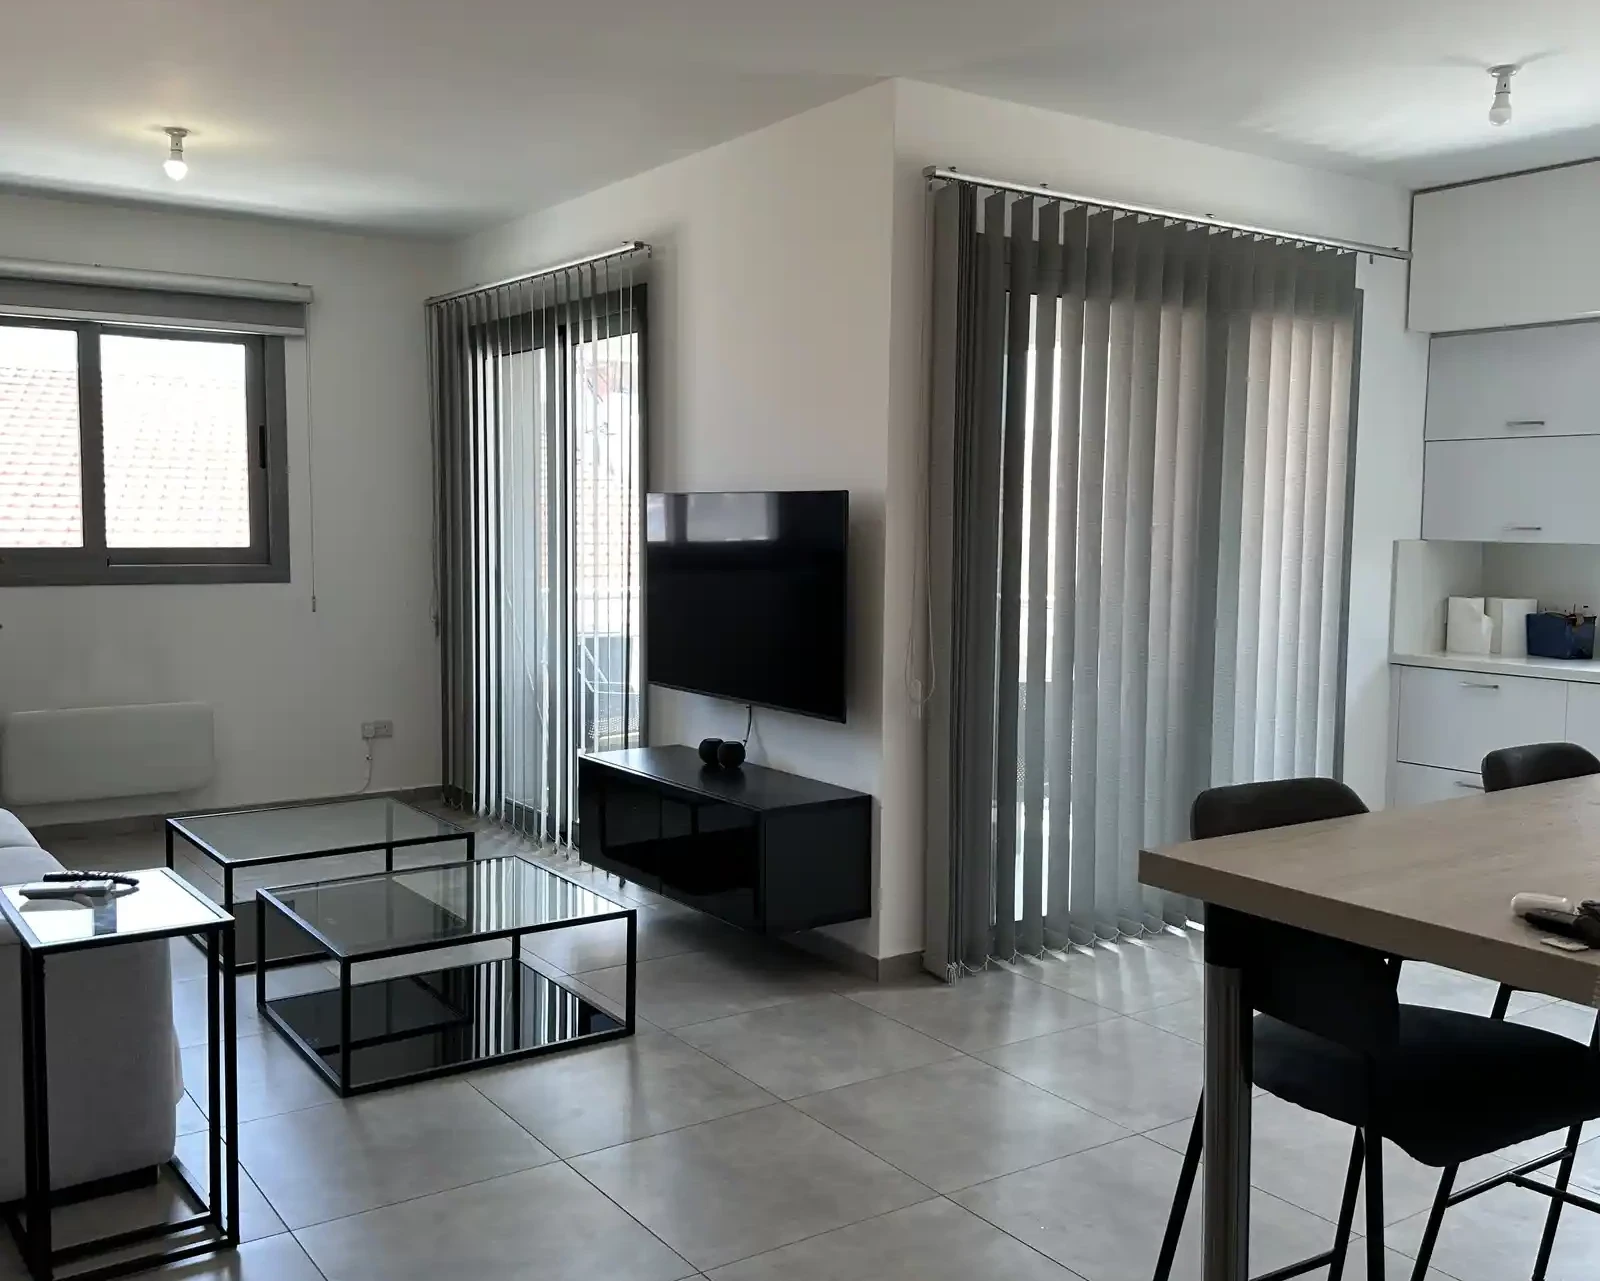 2-bedroom apartment fоr sаle €170.000, image 1